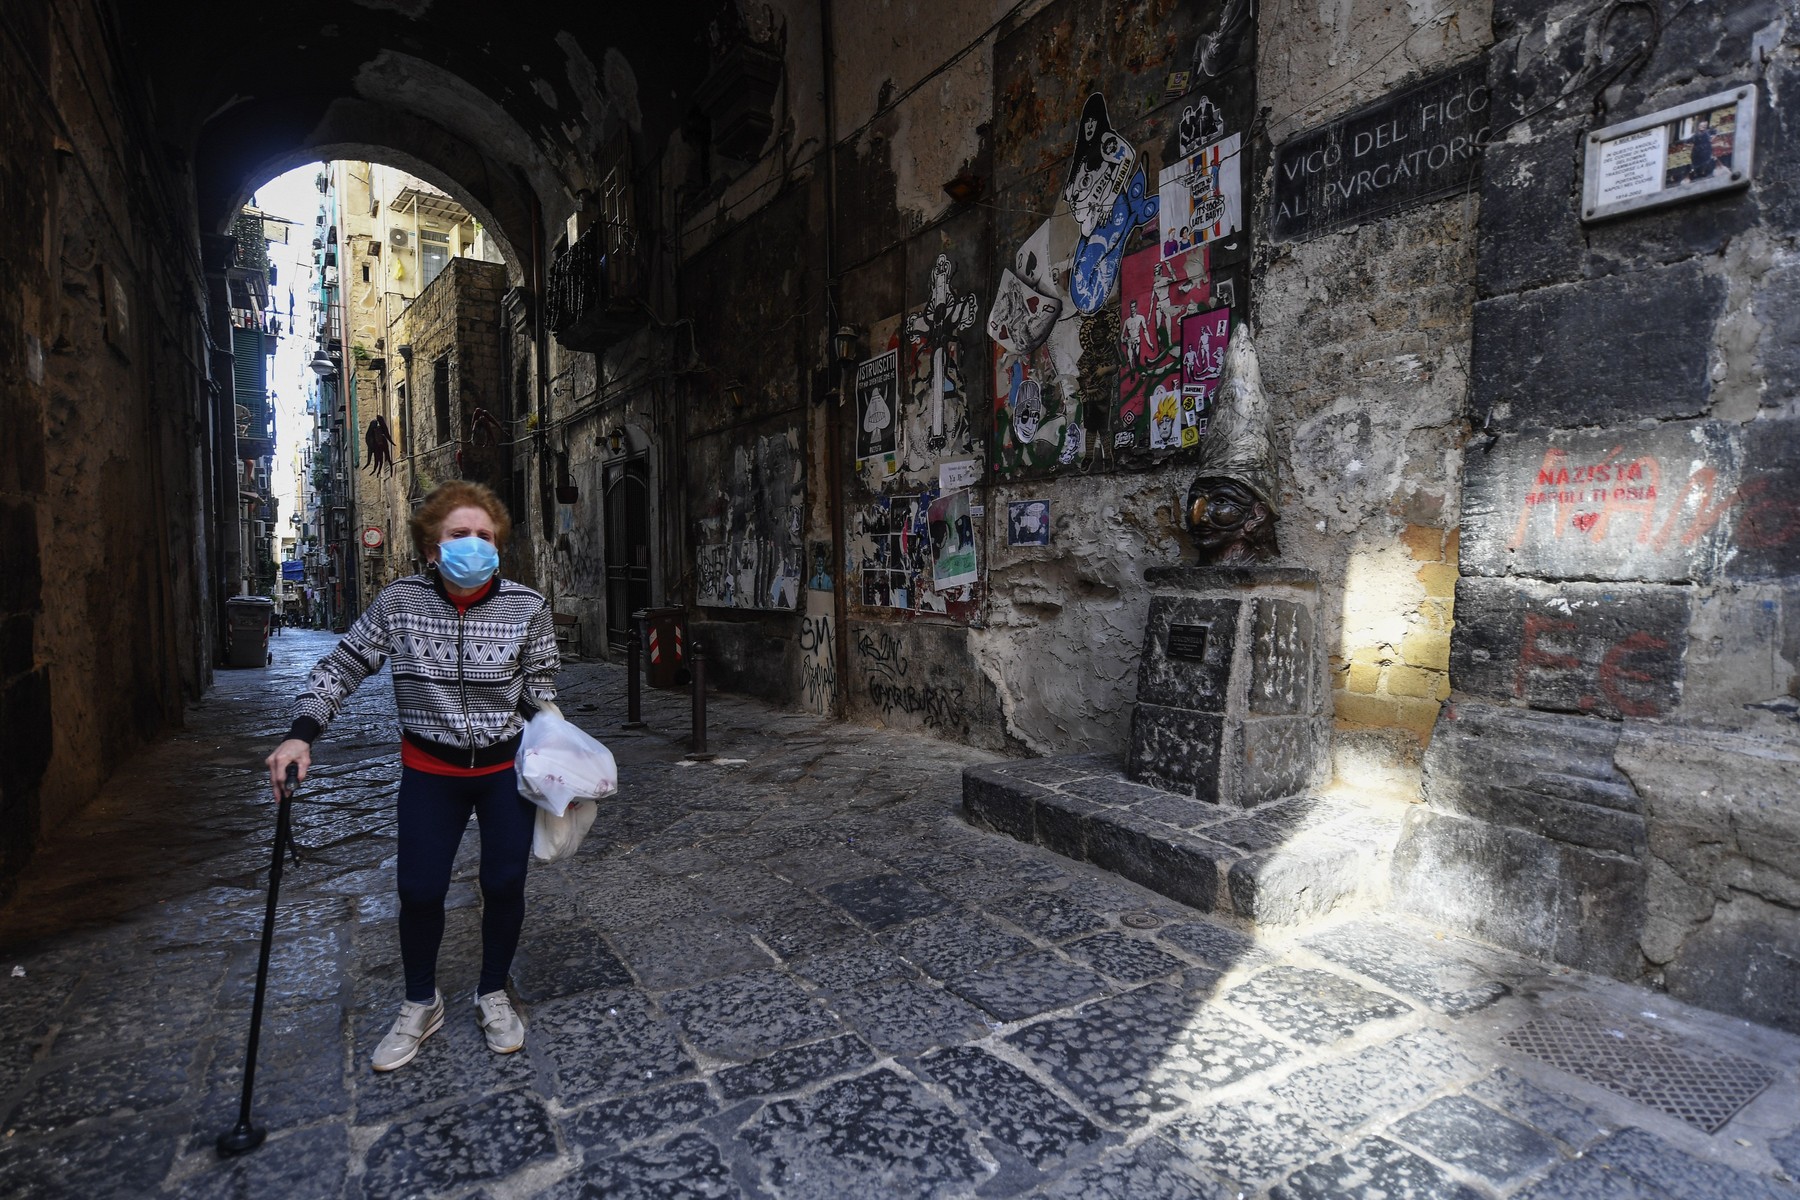 Elderly woman wearing a protective mask in the center of the city of Naples, after a government decree declaring all of Italy a protected area to combat covid-19 coronavirus infection.//IPAPRESSITALY_17080004/2005031715/Credit:Salvatore Laporta / IPA/I/SIPA/2005031716, Image: 516698694, License: Rights-managed, Restrictions: , Model Release: no, Credit line: Salvatore Laporta / IPA/I / Sipa Press / Profimedia